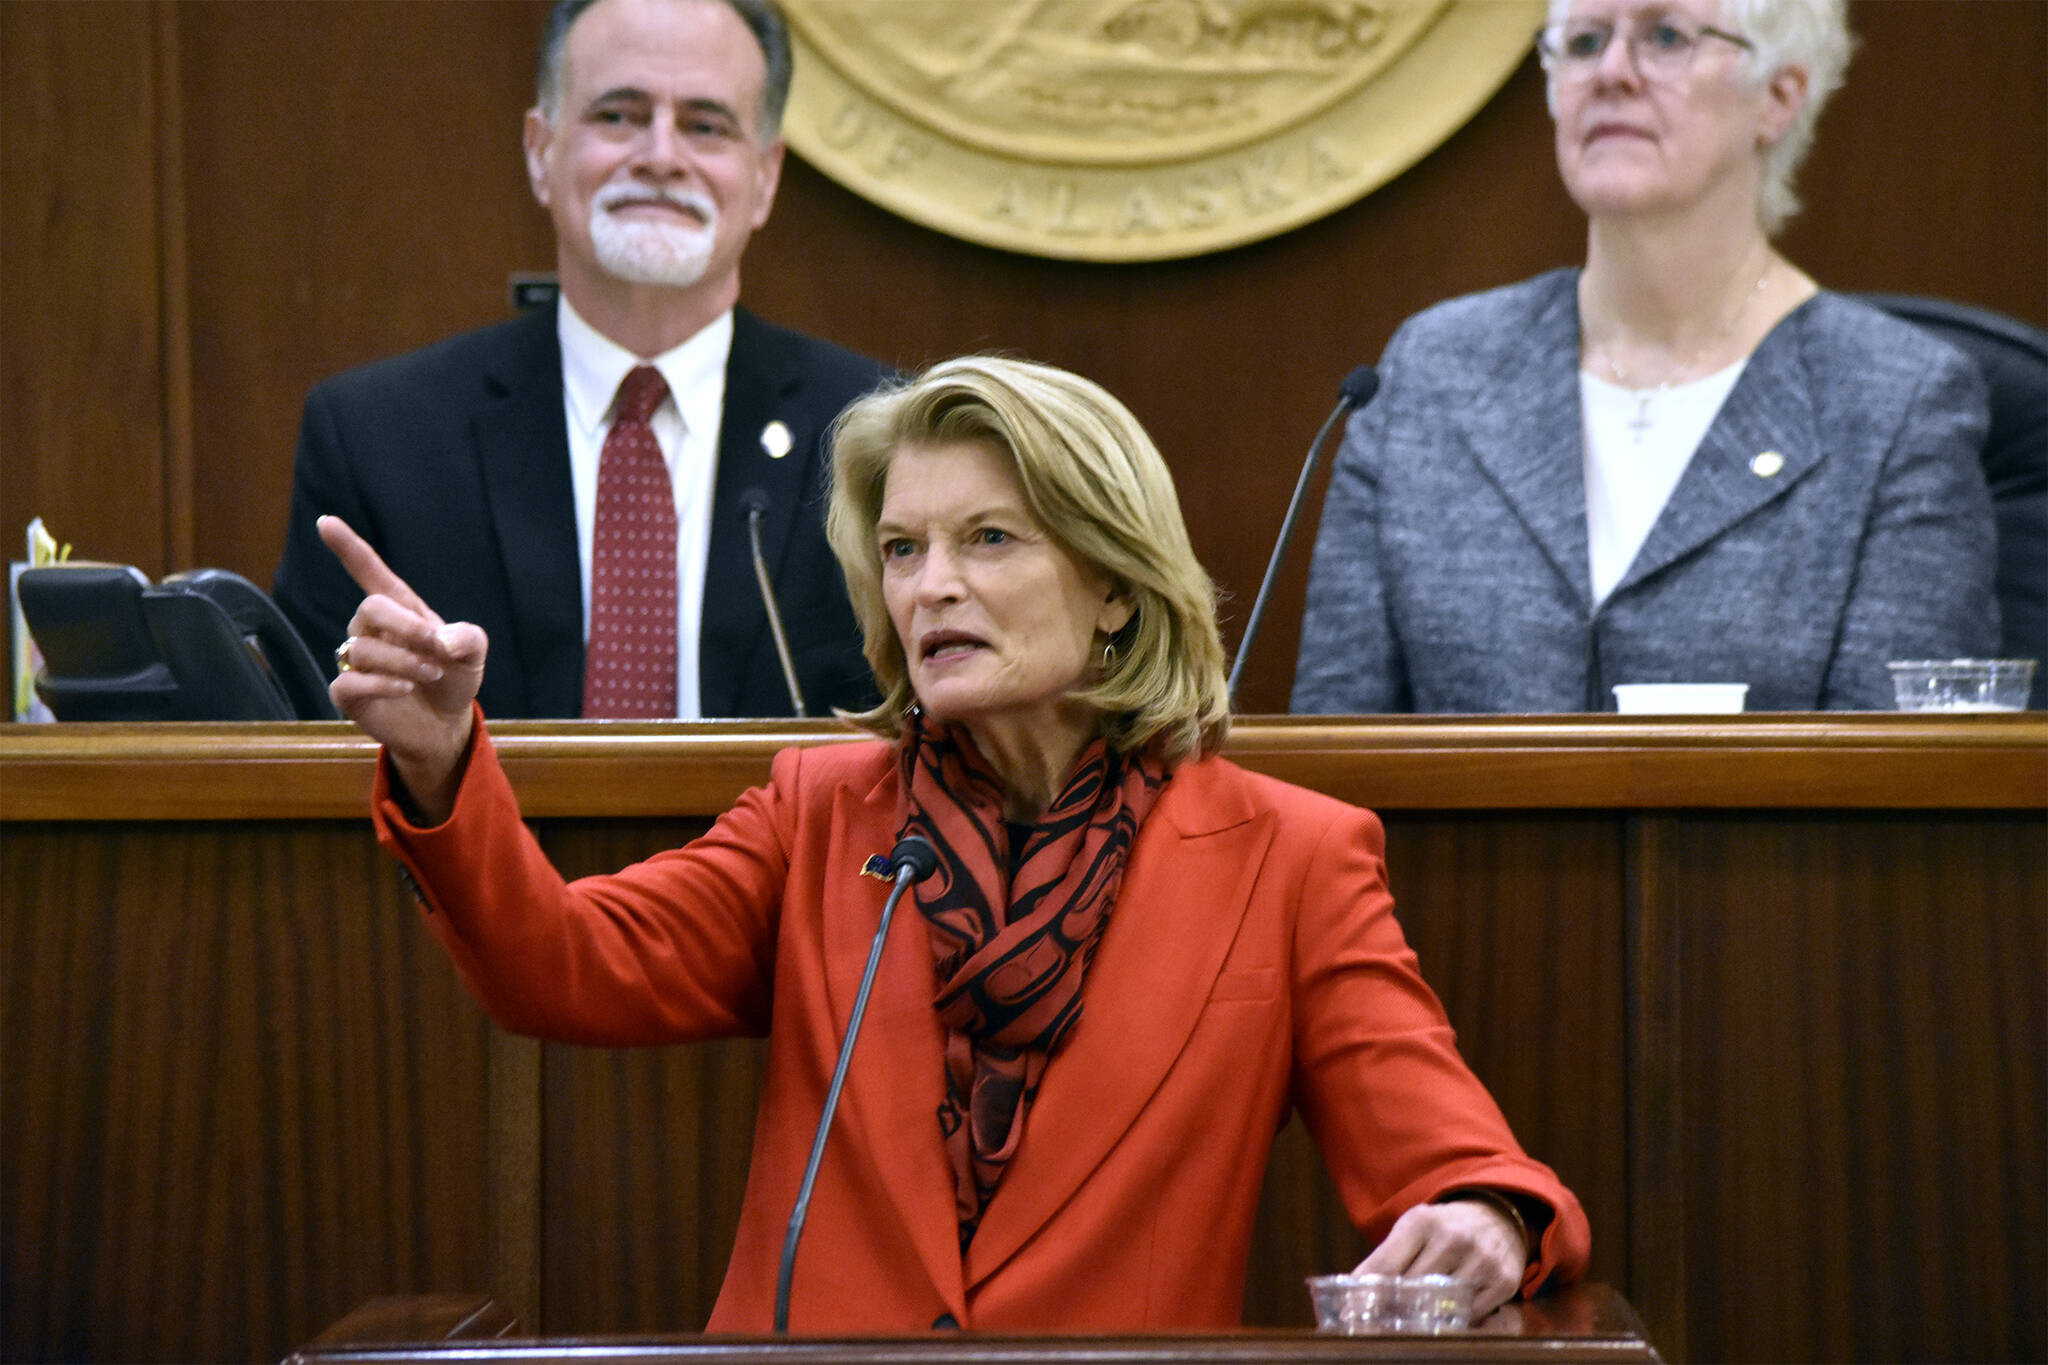 U.S. Sen. Lisa Murkowski, R-Alaska, gave her annual address to the Alaska State Legislature Tuesday, Feb. 22, 2022, at the Capitol building in Juneau. Murkowski's speech emphasized bipartisanship and making Alaska ready for the opportunities brought by the recent infrastructure package. (Peter Segall / Juneau Empire)